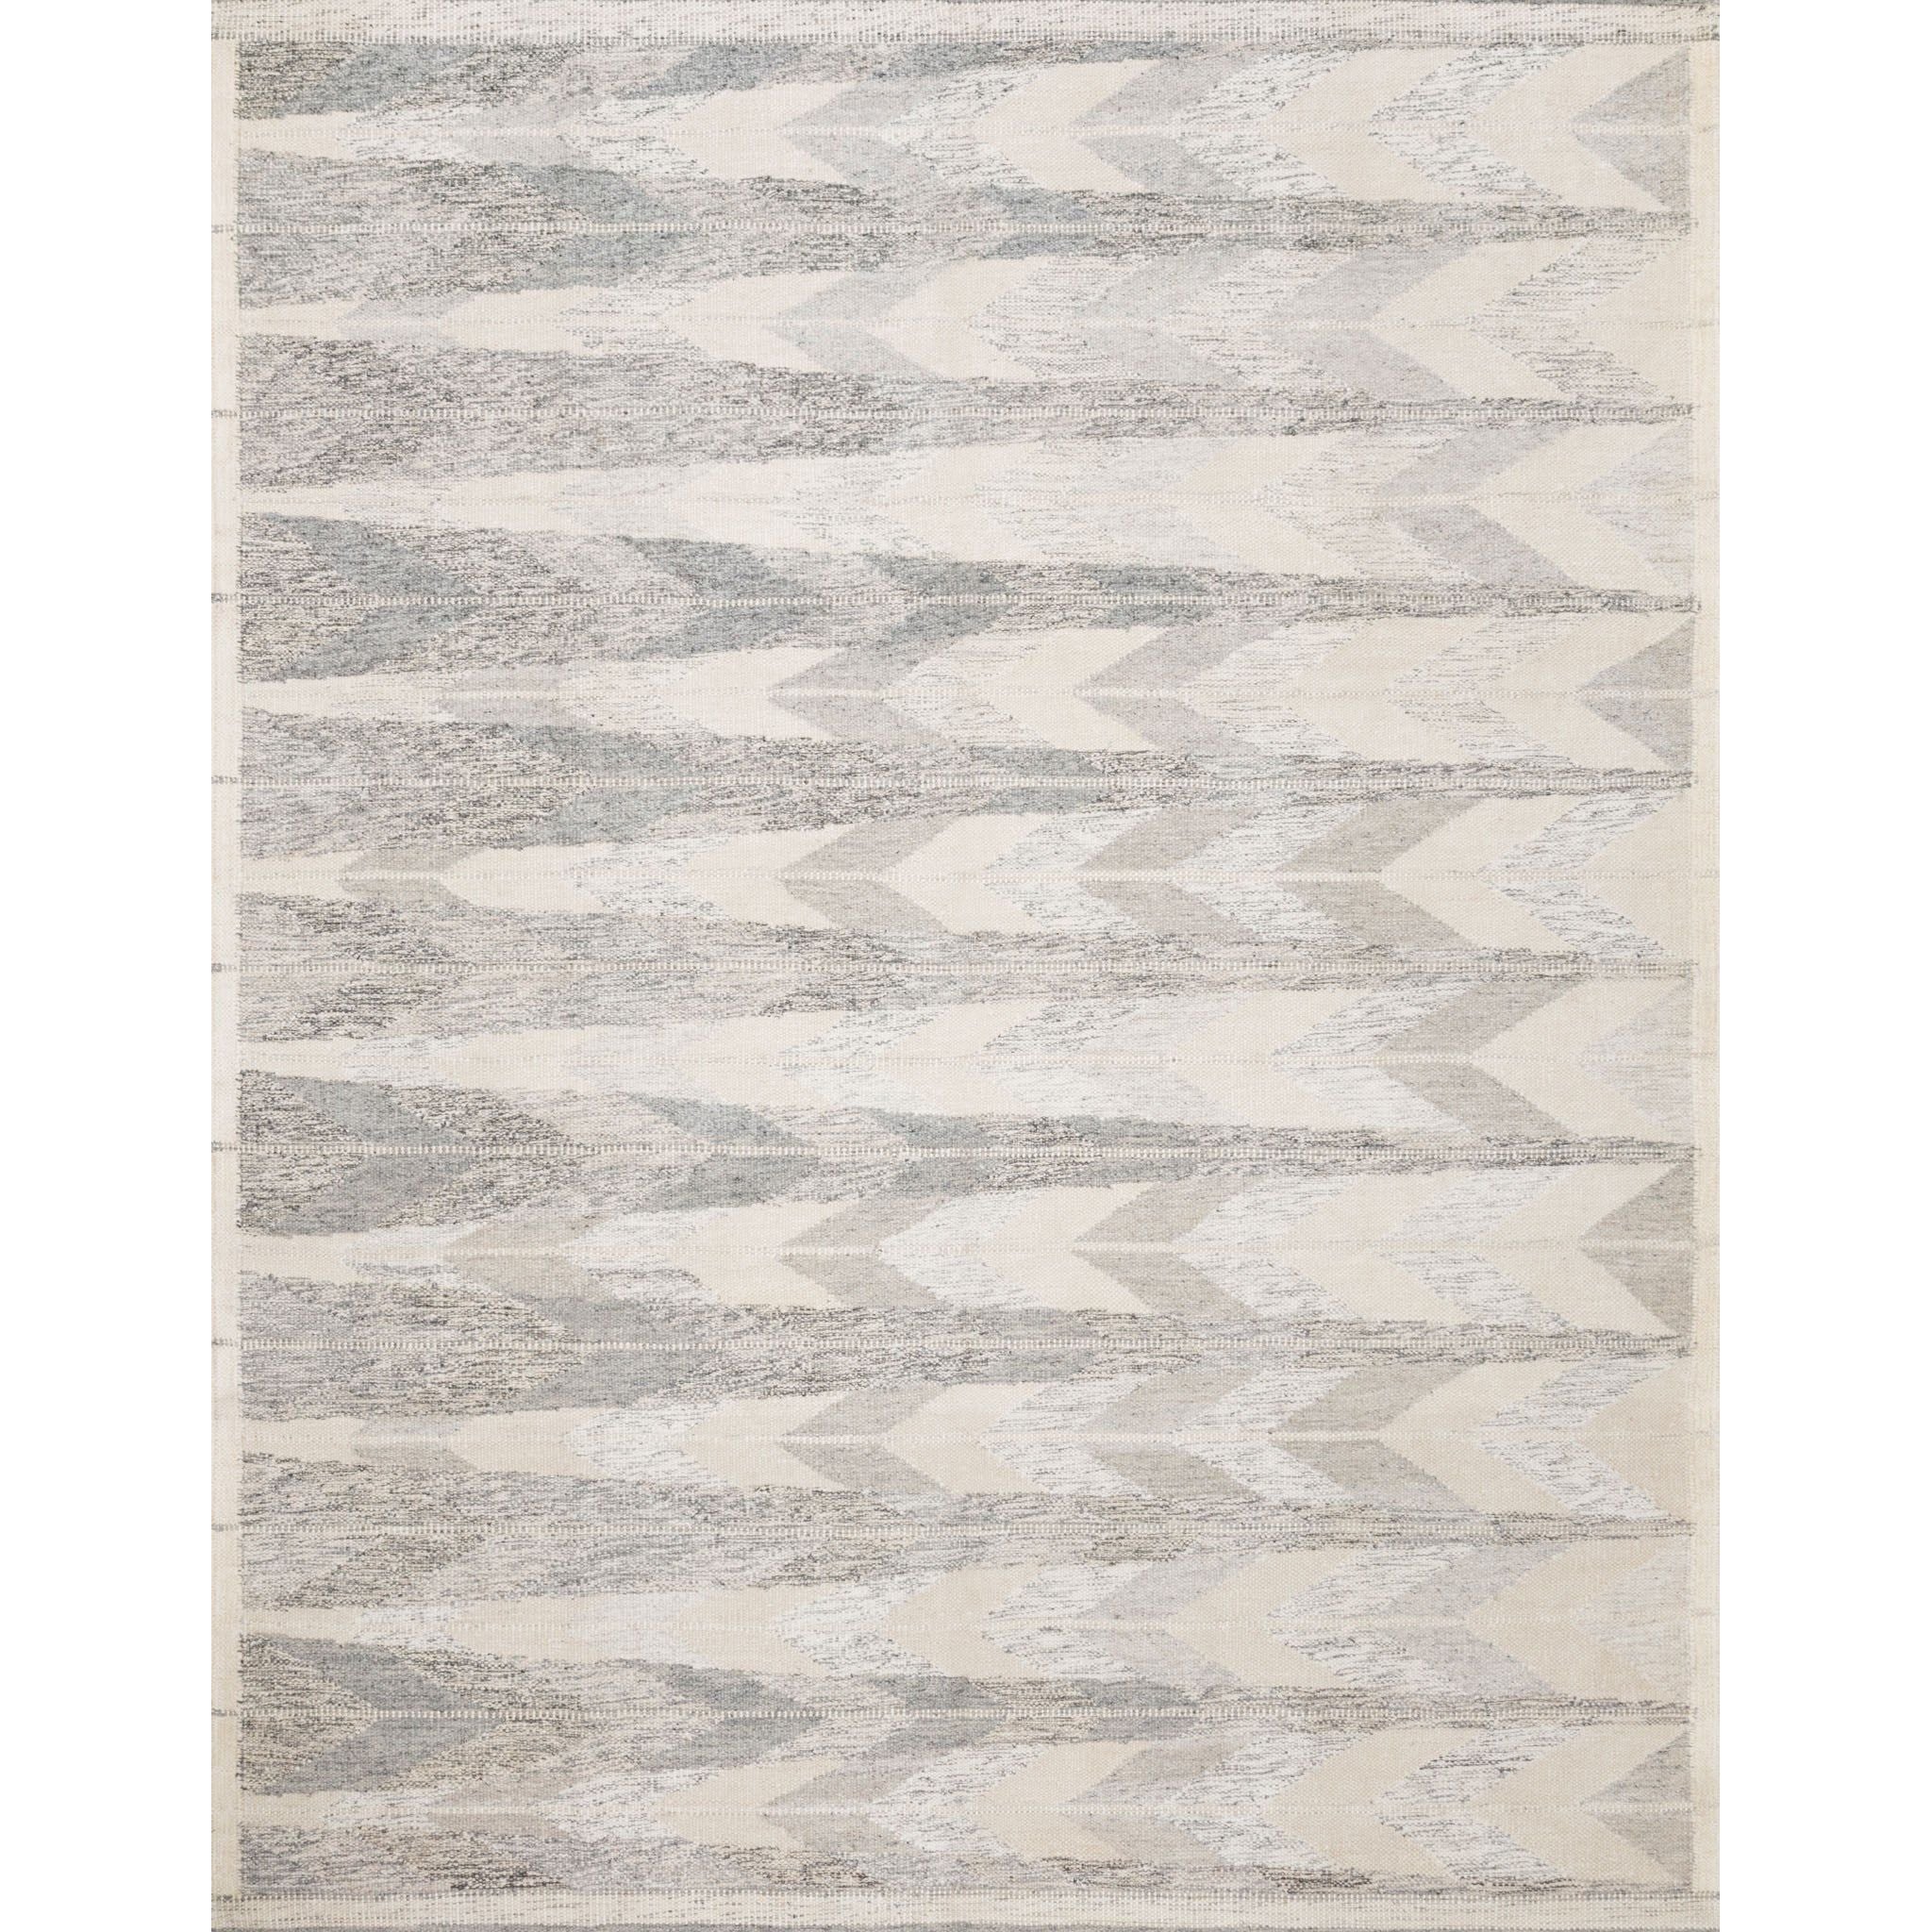 Evelina Pewter/Silver Rug - Amethyst Home Hand-woven in India with a luxurious blend of wool, cotton, viscose, viscose from bamboo, chenille, acrylic, and linen, this calming collection of contemporary neutral tones will add balance and warmth to any space.